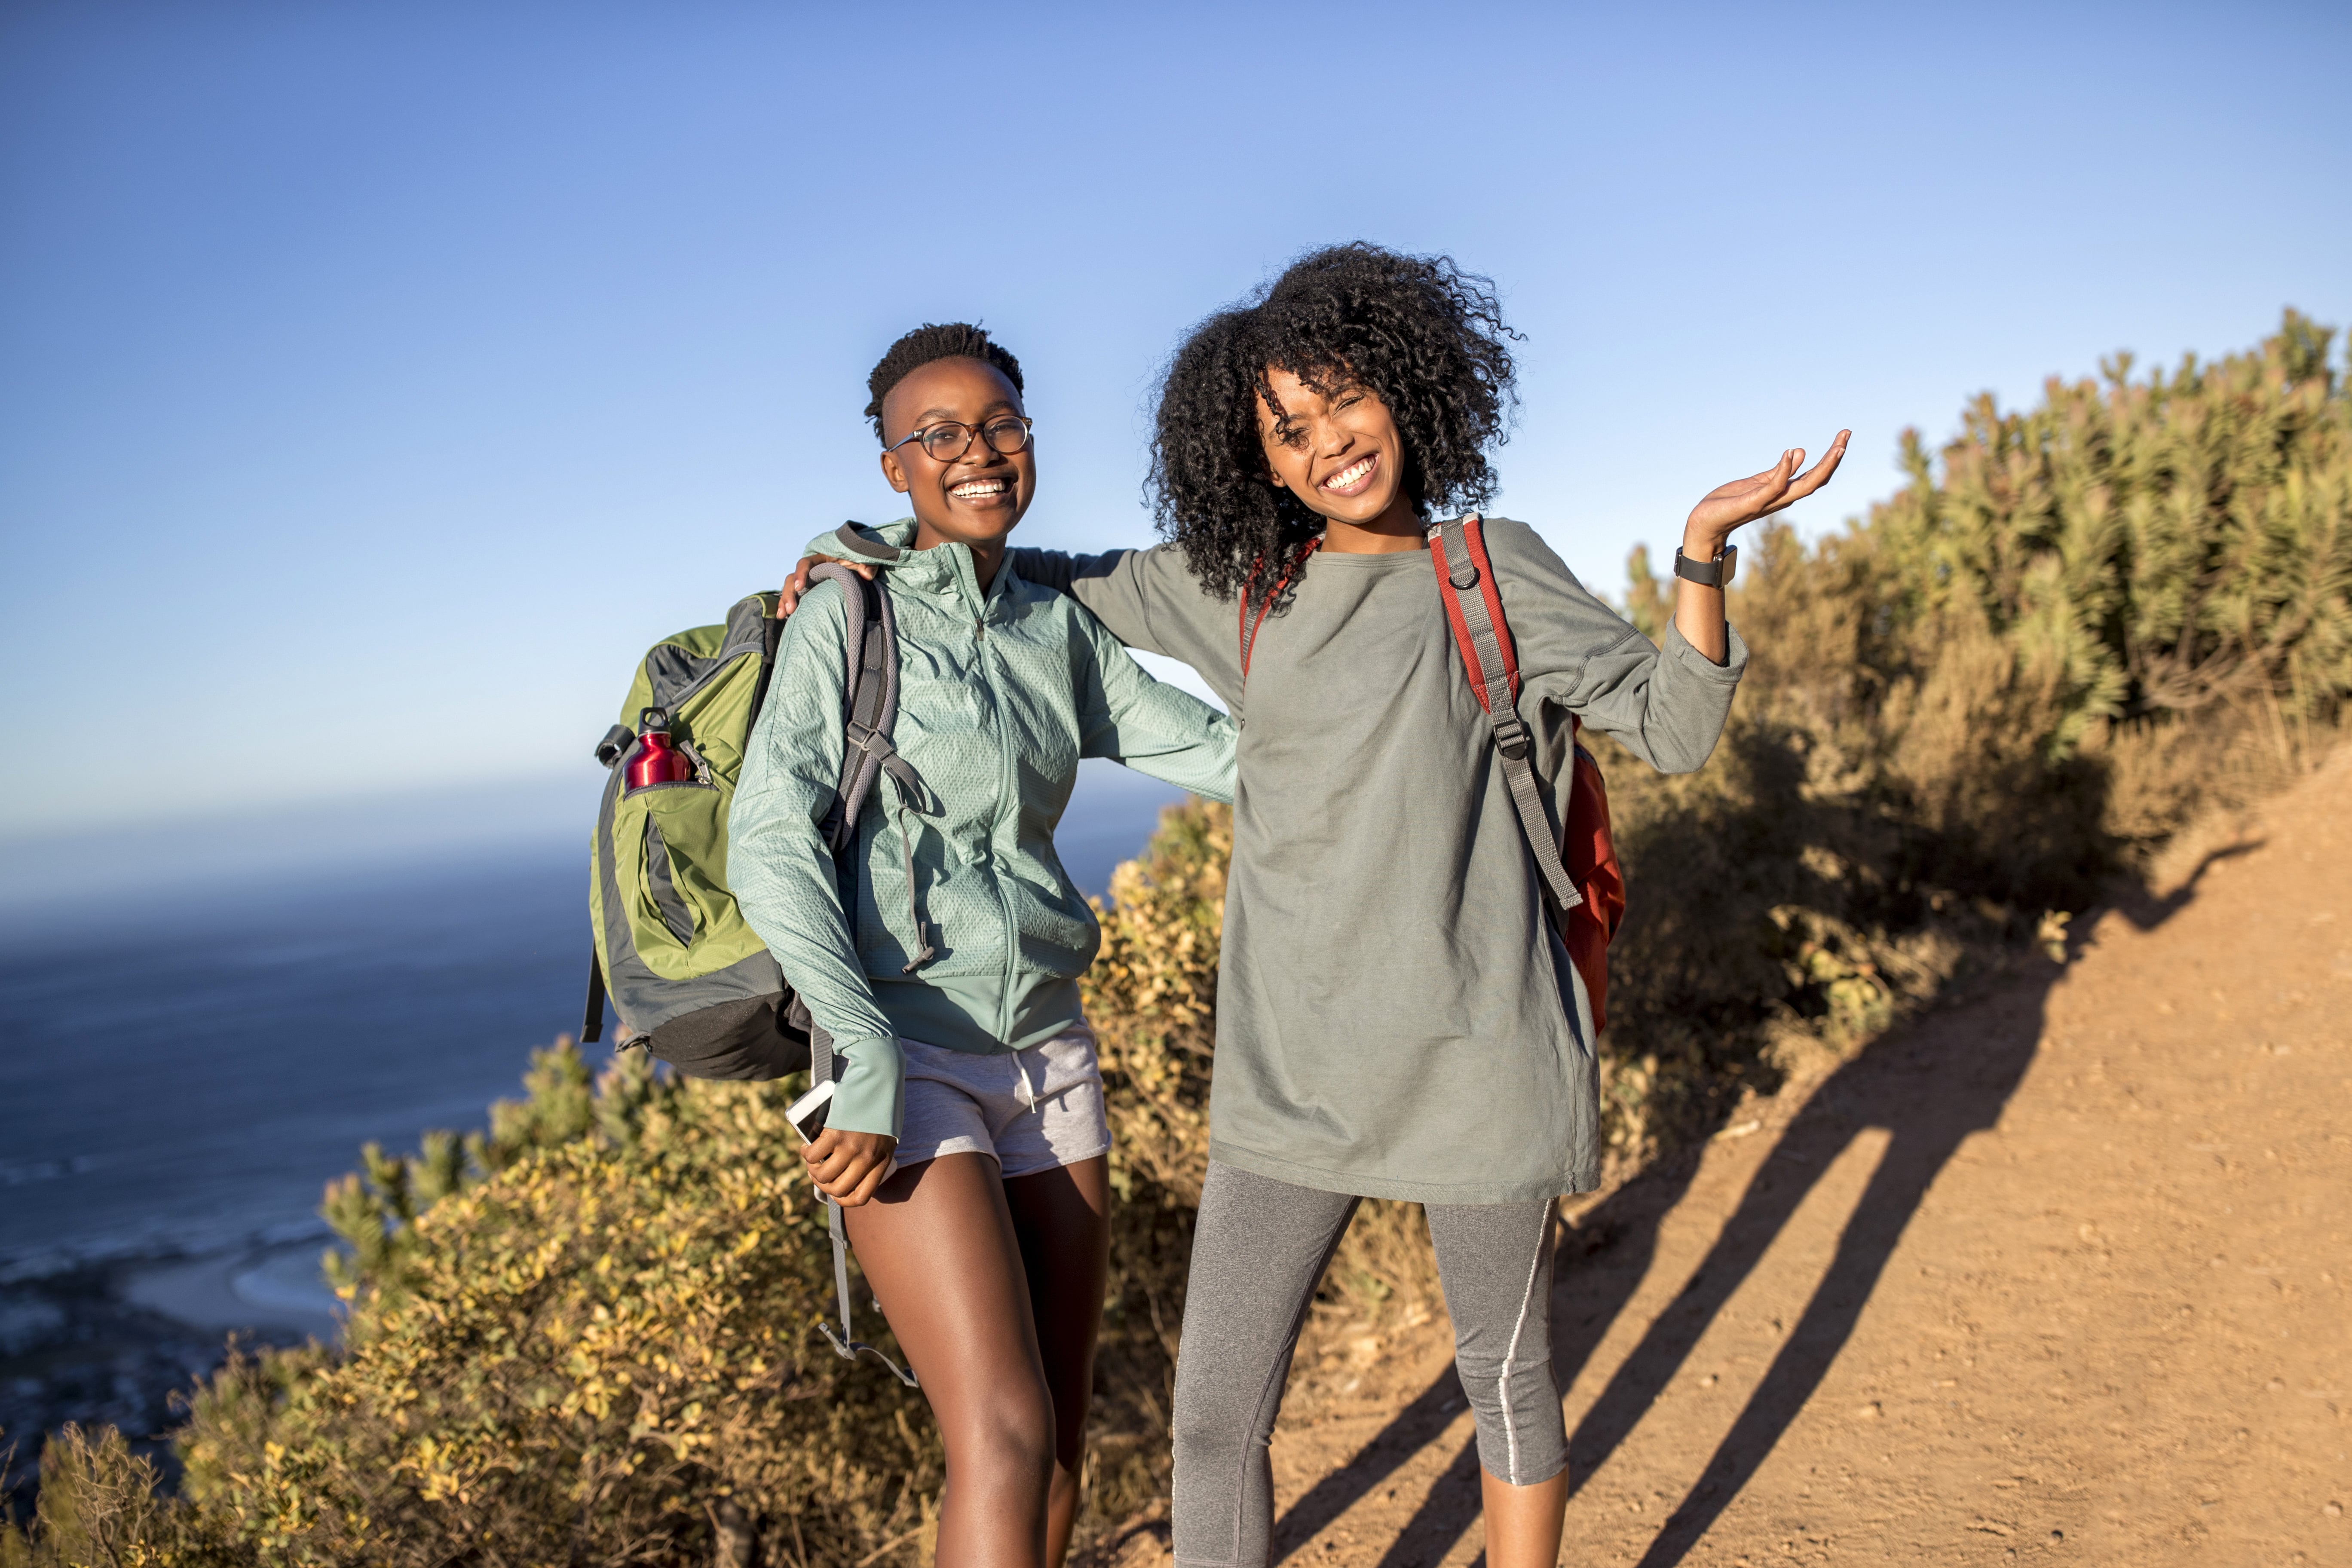 Outfits and Gear for Hiking and Backpacking in the Fall